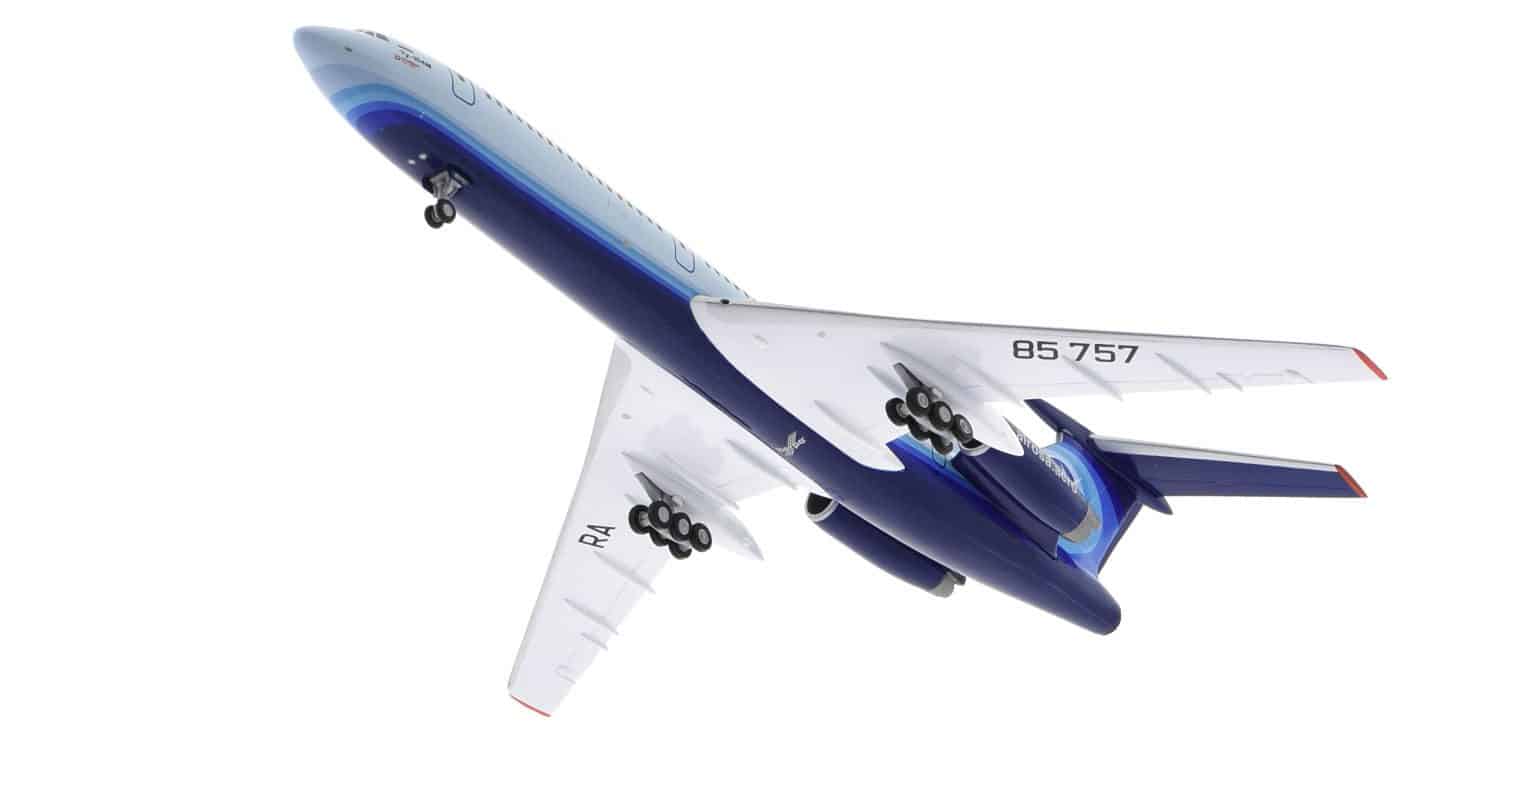 Underside view of Herpa HE571388 - 1/200 scale diecast model of the Tupolev Tu-154M registration RA-85757 in Air Company ALROSA livery, October 2020. This aircraft operated the last commercial flight in Russia of the Tu-154.